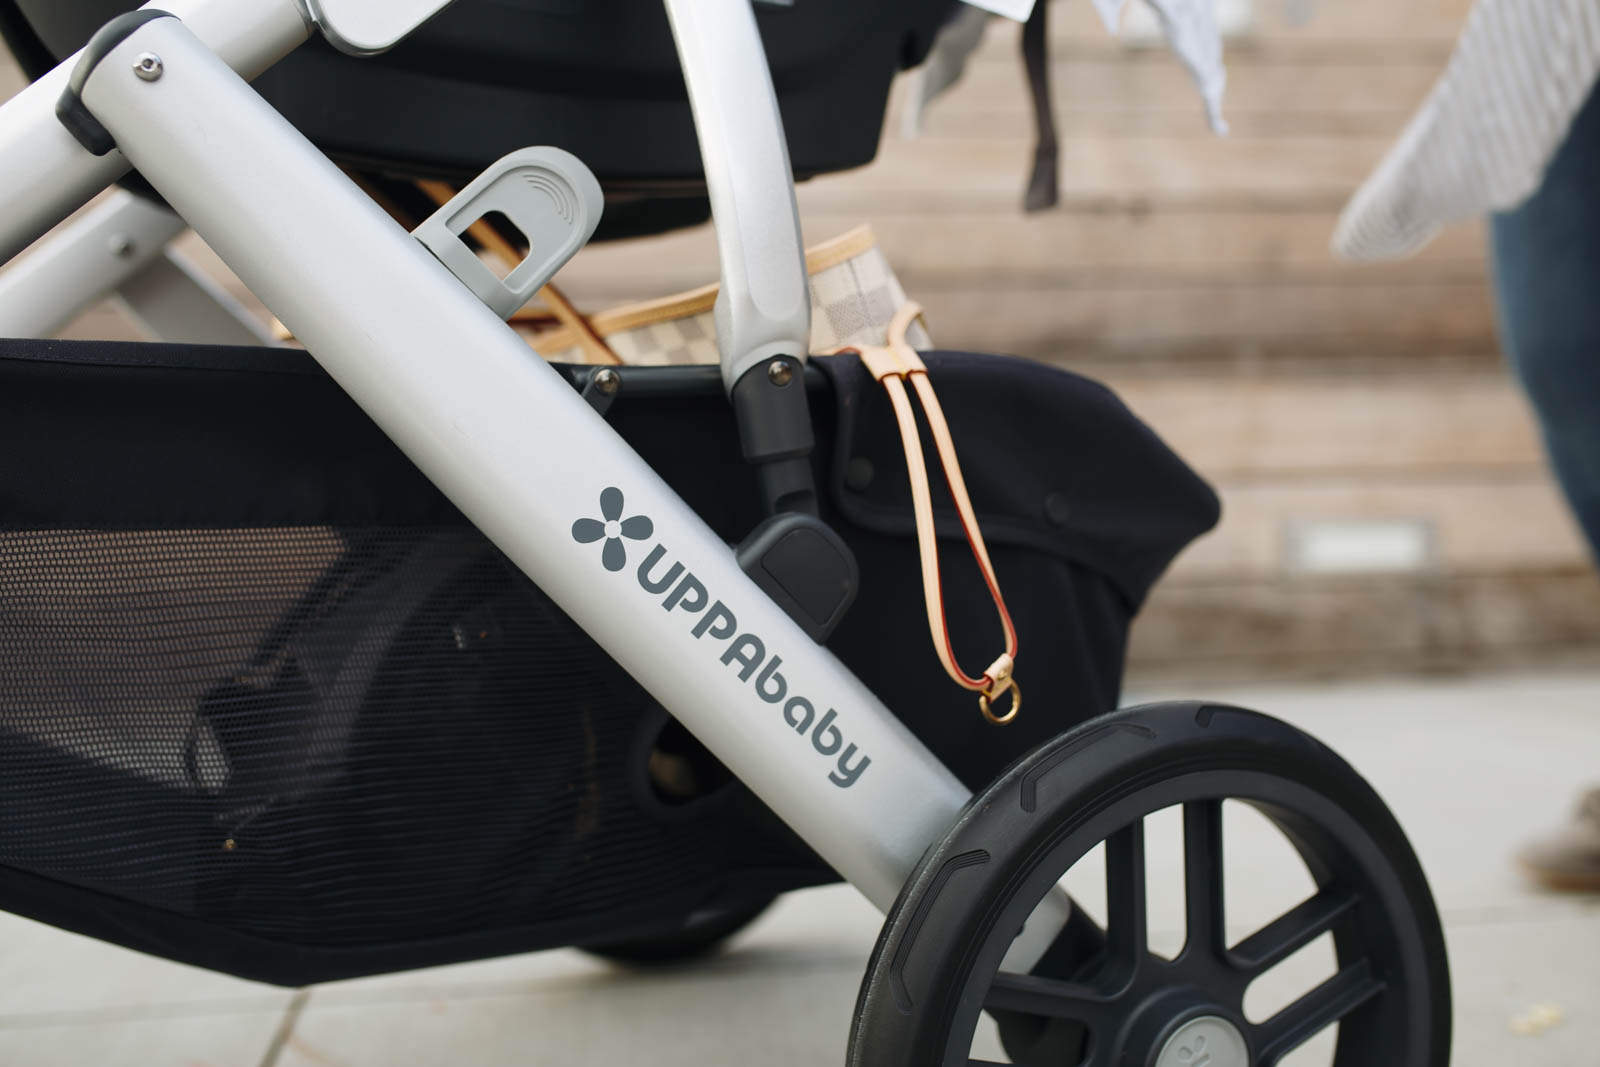 UPPAbaby VISTA and MESA system | Milo | Mae Amor | Mae Nuñez | Baby Gear | Best Stroller | Best Car Seat